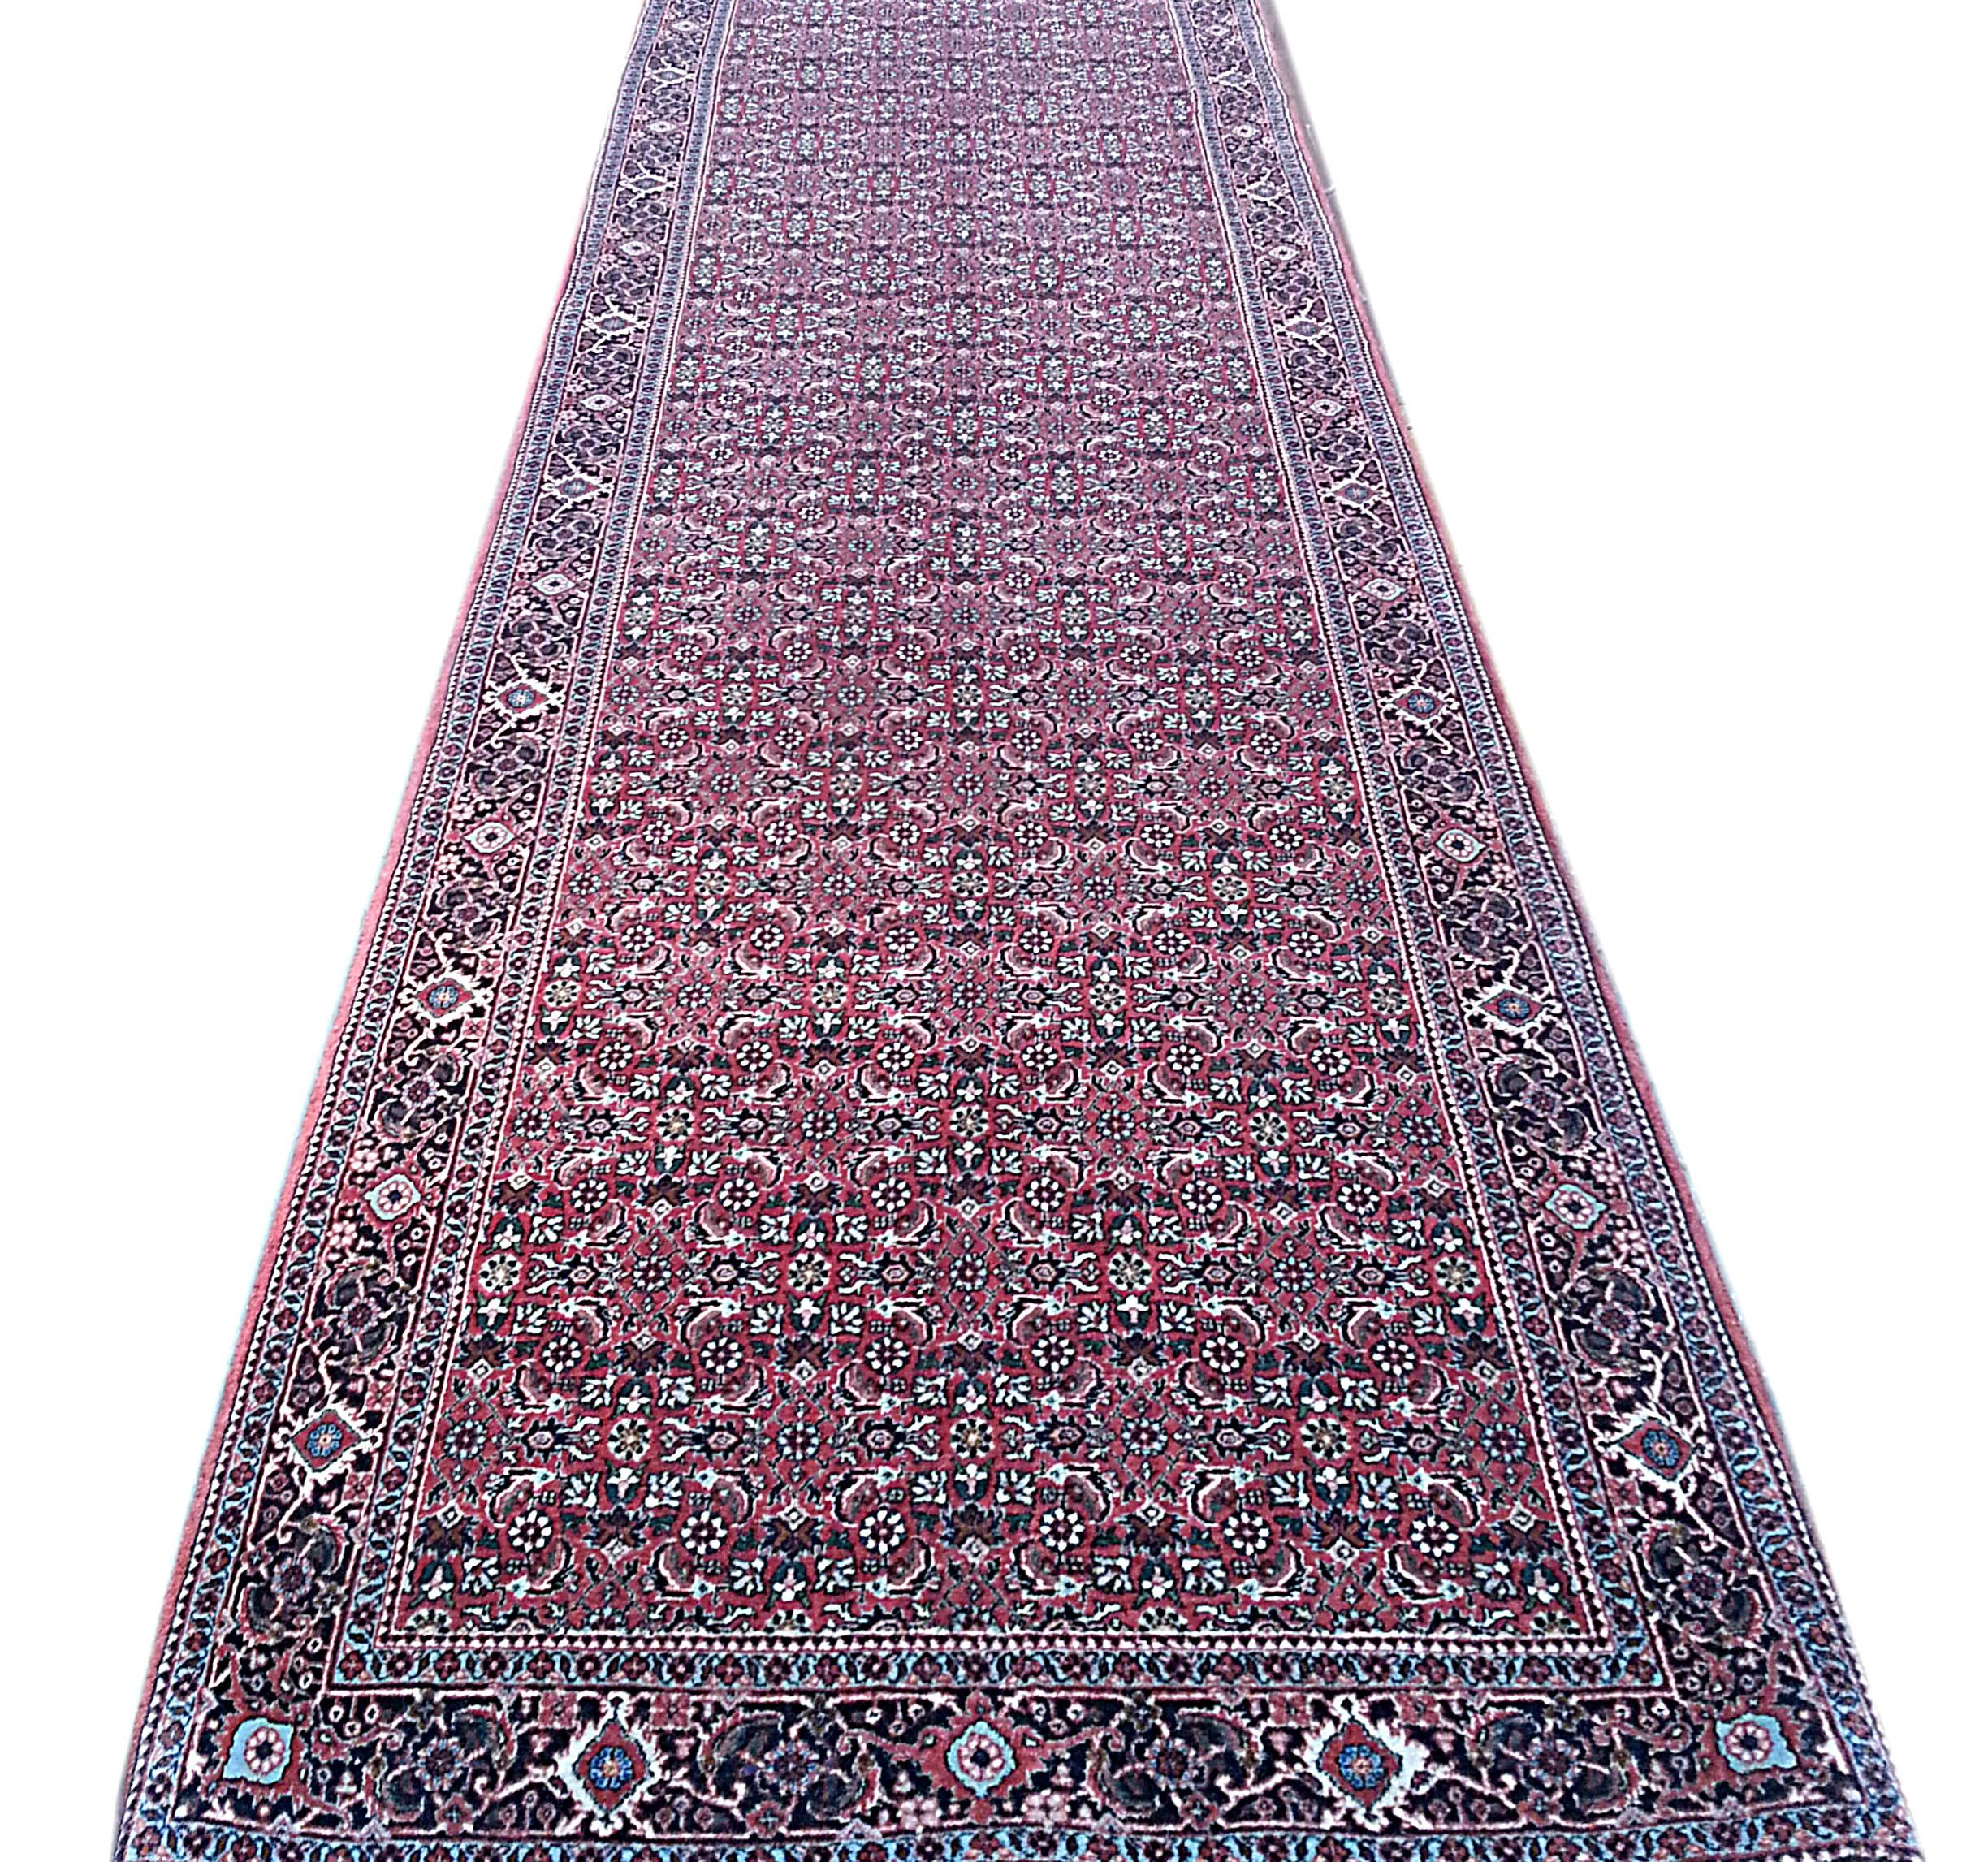 This Authentic beautiful oversized Bijar runner has wool pile and cotton foundation. The rug is all-over floral which is called Herati design. The color combination in this piece is red, cream and blue. Bijar rugs are well known for their